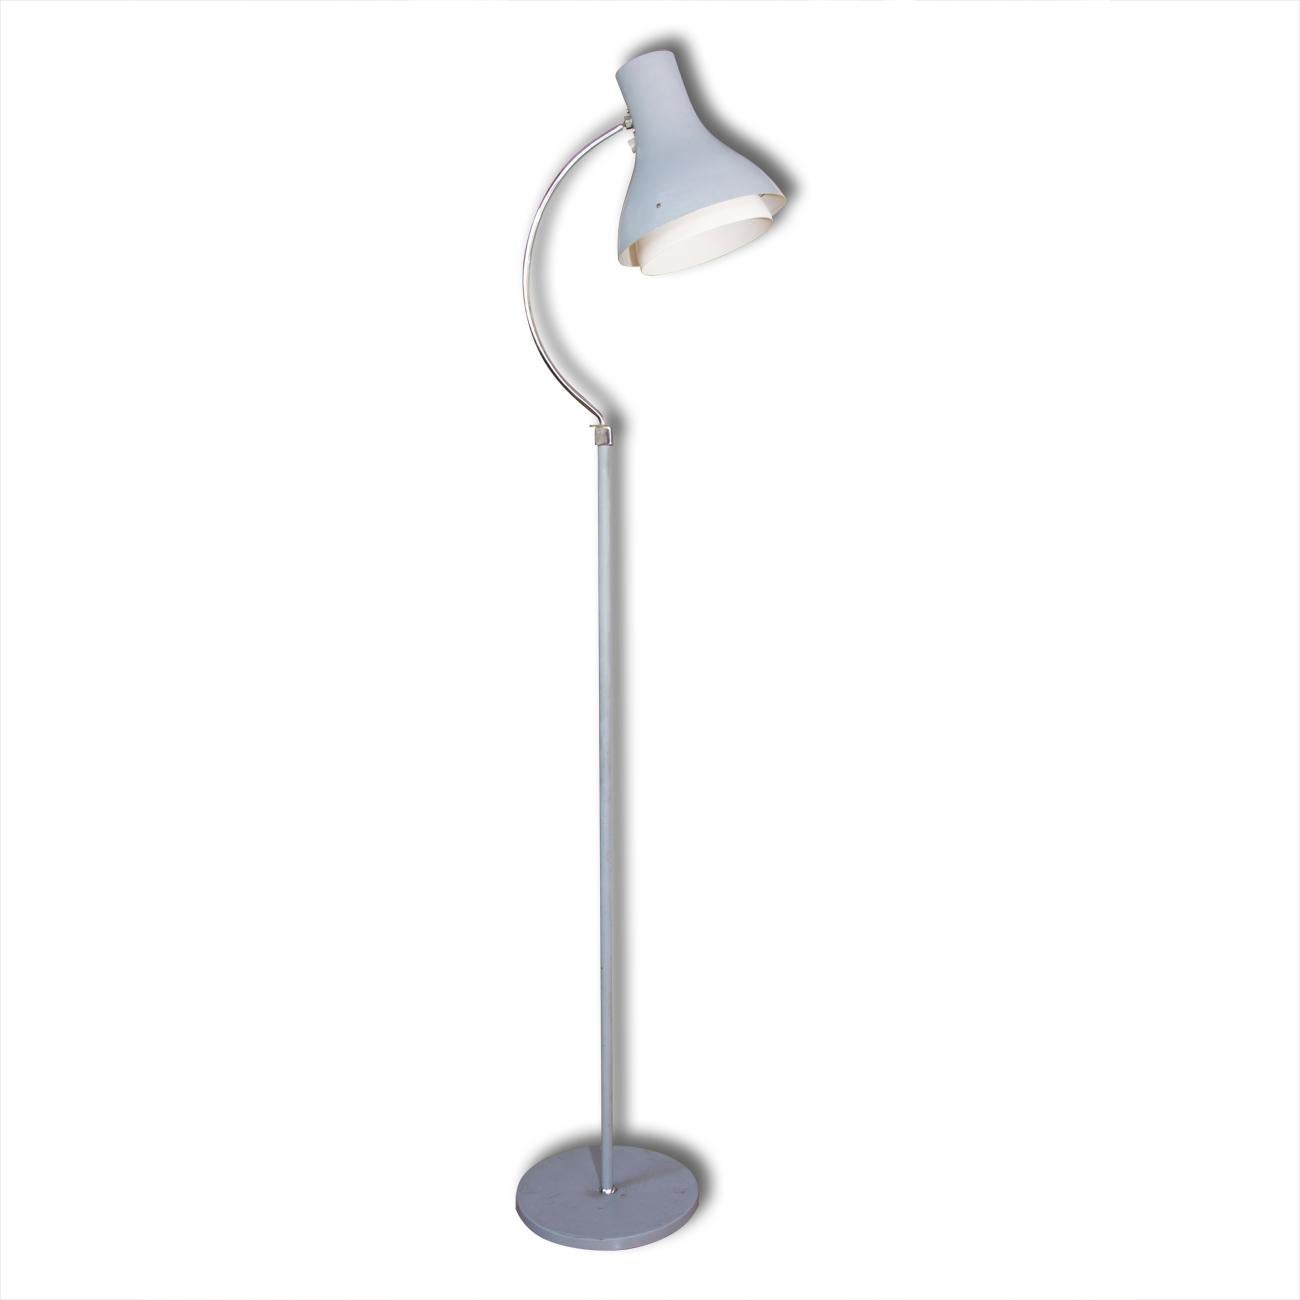 Midcentury vintage metal floor lamp designed by Josef Hurka for Napako associated with “Brussels period” and world-renowned EXPO58. The lamp features the slender leg and neutral blue-grey color, chrome-plated construction, lampshade adjustable to